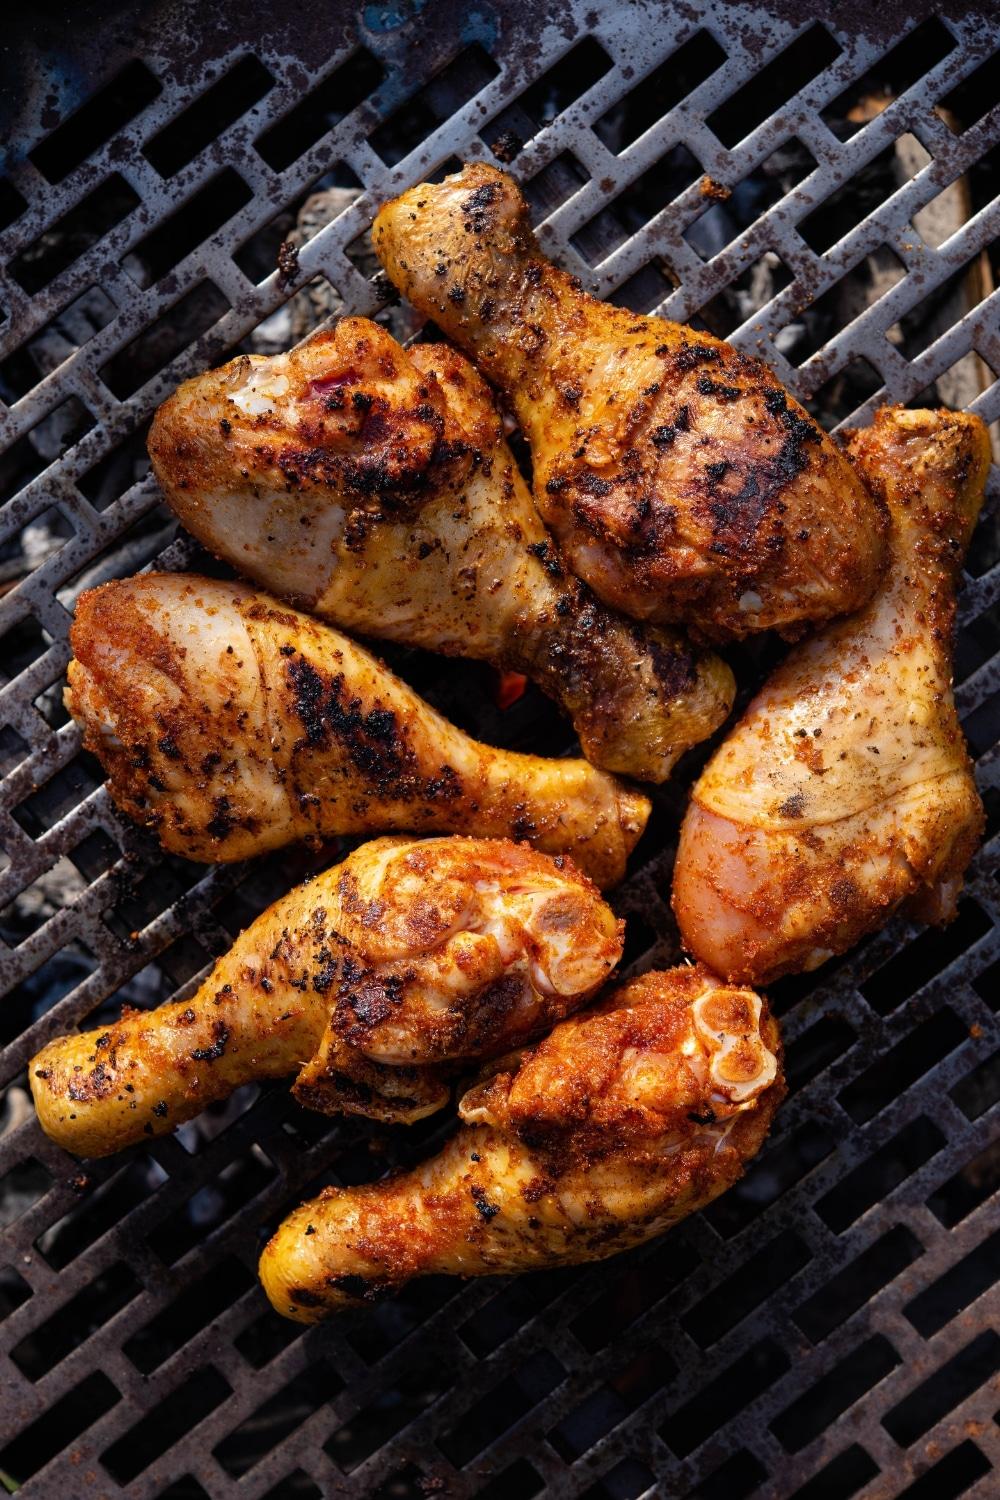 Six seasoned chicken drumsticks on a charcoal grill.